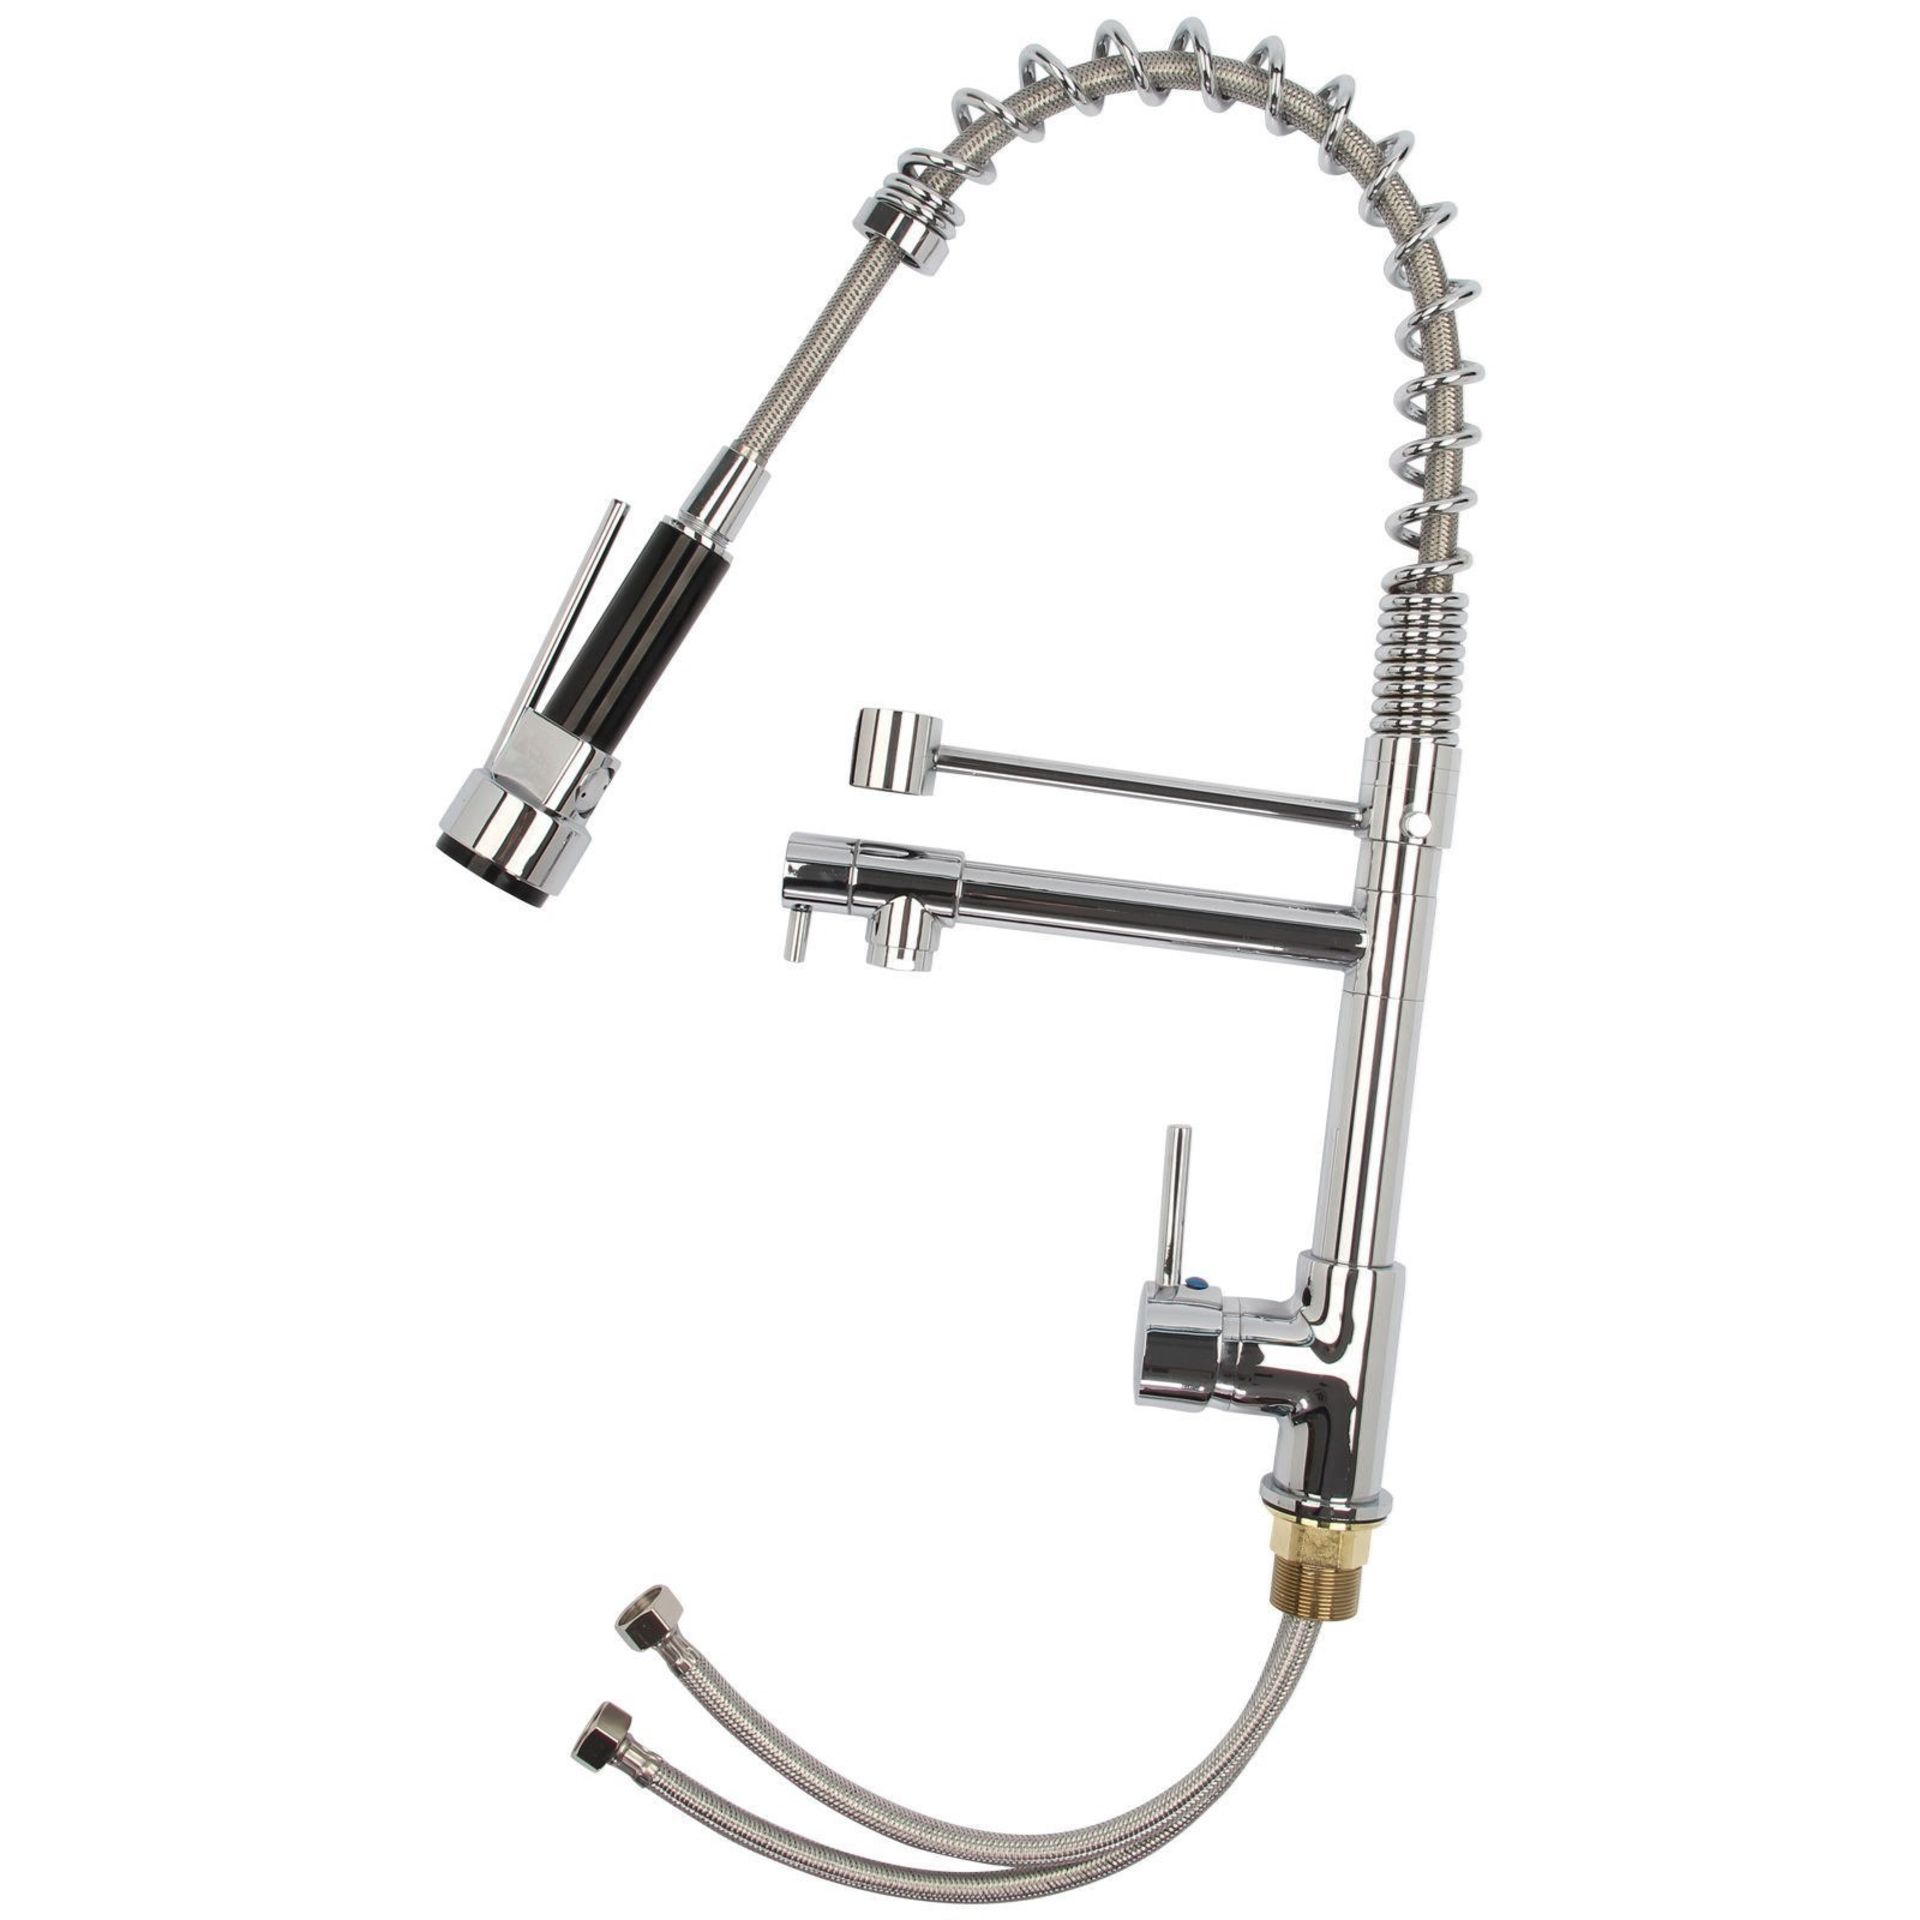 Bentley Modern Monobloc Chrome Brass Pull Out Spray Mixer Tap.RRP £349.99.This tap is fro... - Image 2 of 2